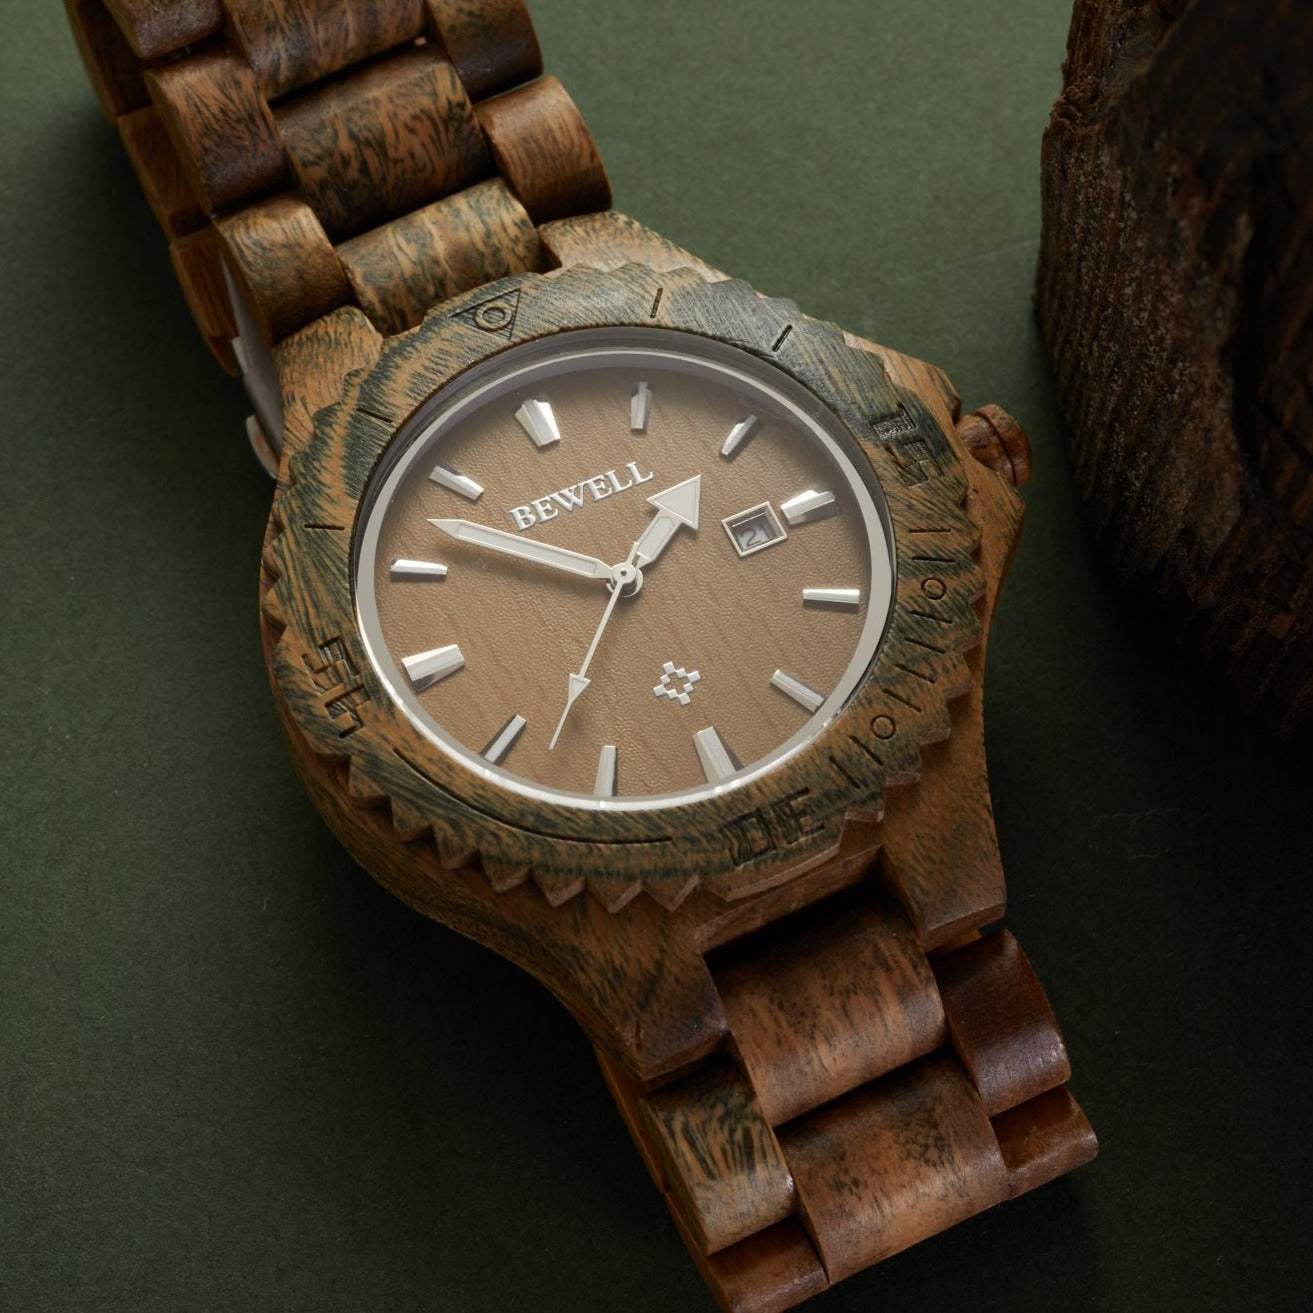 Bewell Watches - US Official Site | Wooden Watches & Accessories